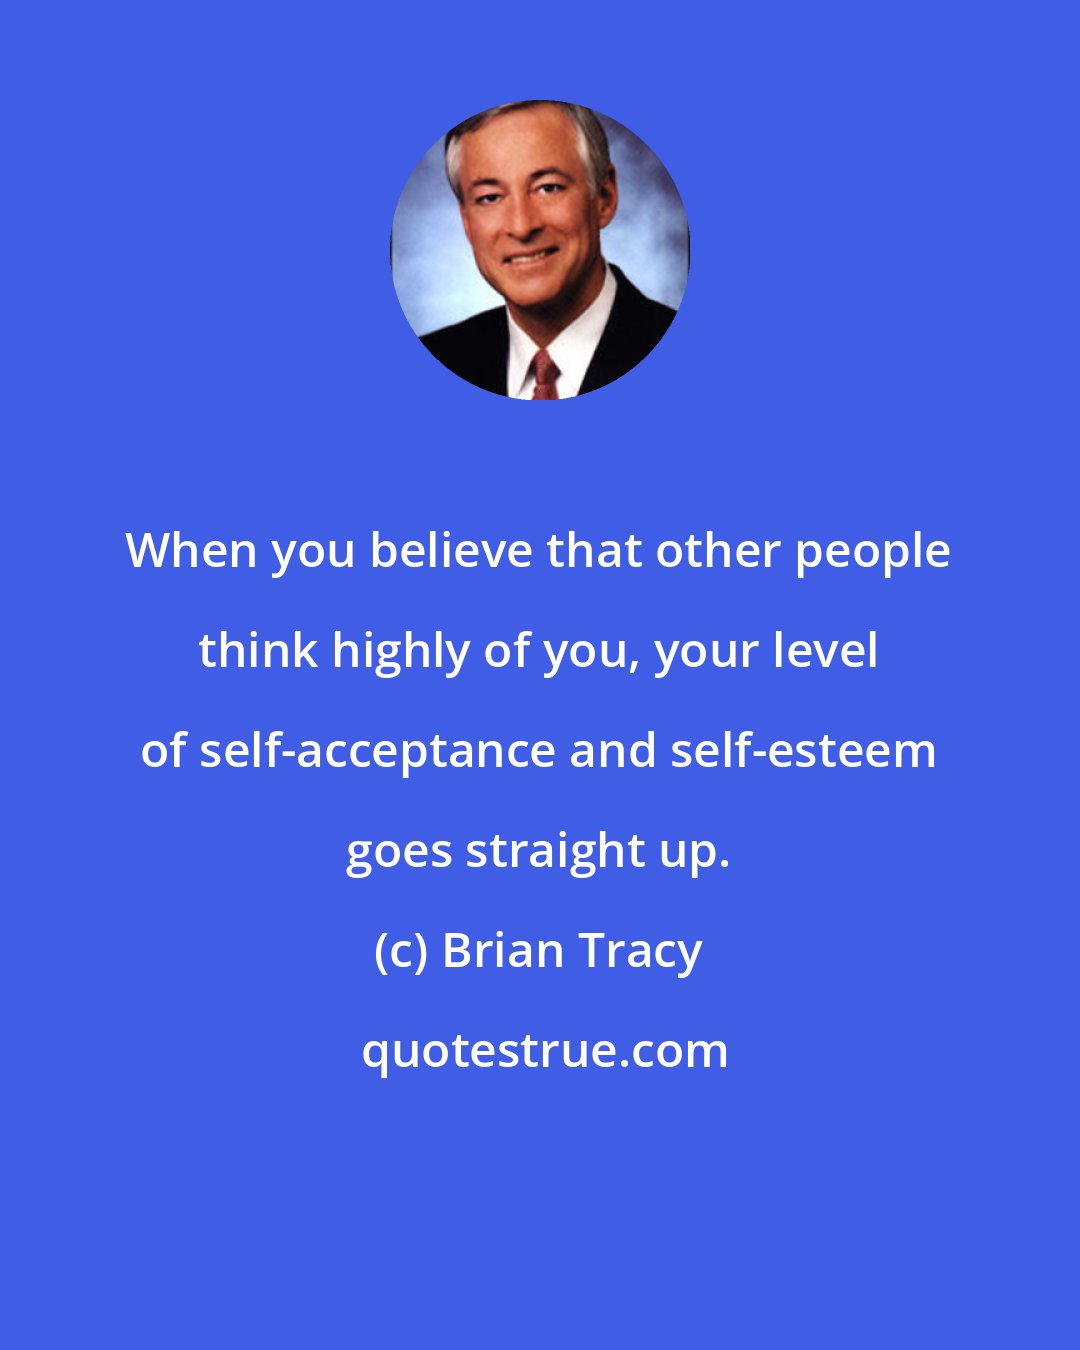 Brian Tracy: When you believe that other people think highly of you, your level of self-acceptance and self-esteem goes straight up.